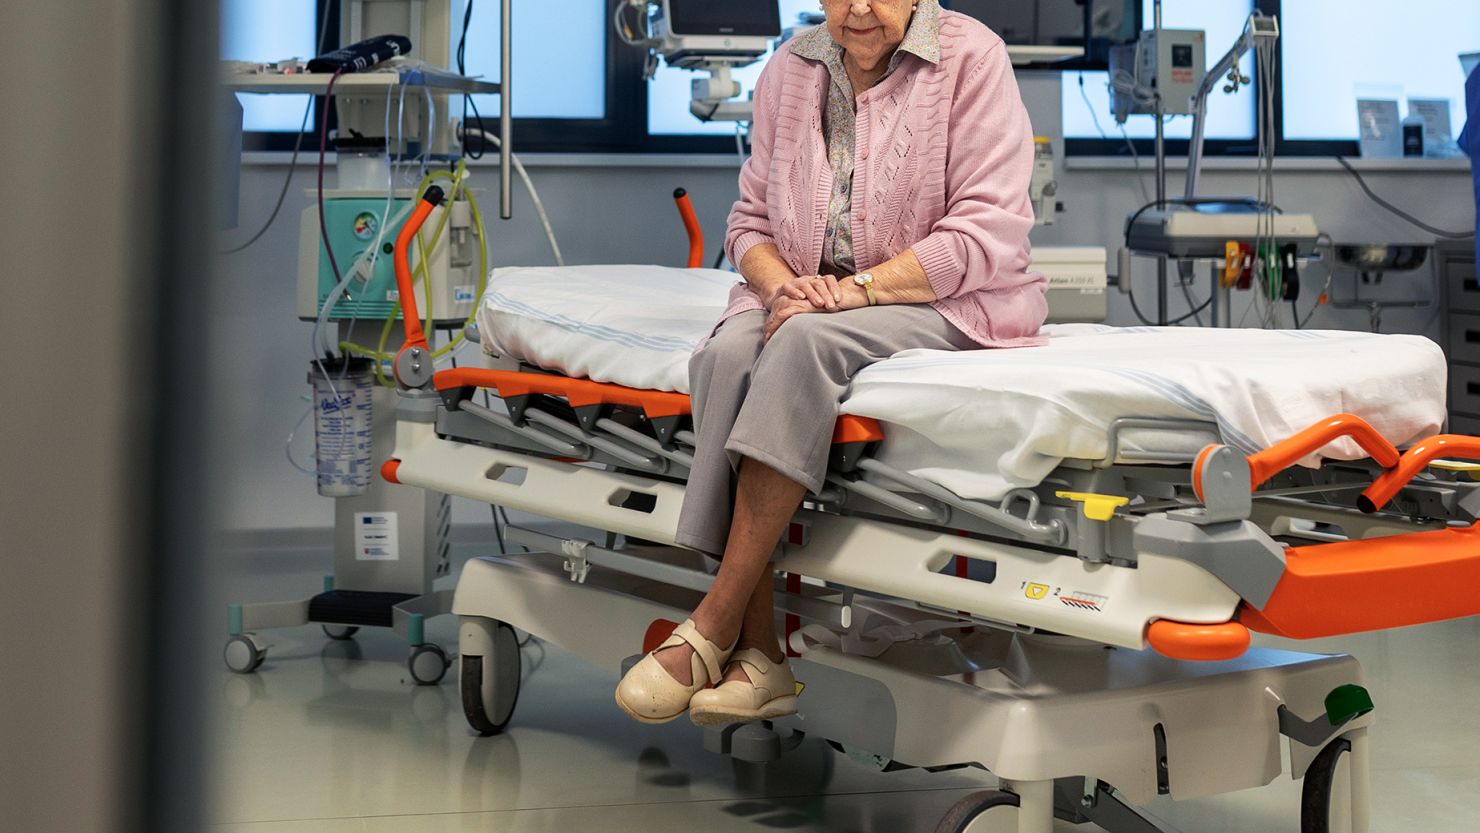 Adults 65 and older are especially vulnerable during long waits for care in emergency rooms.